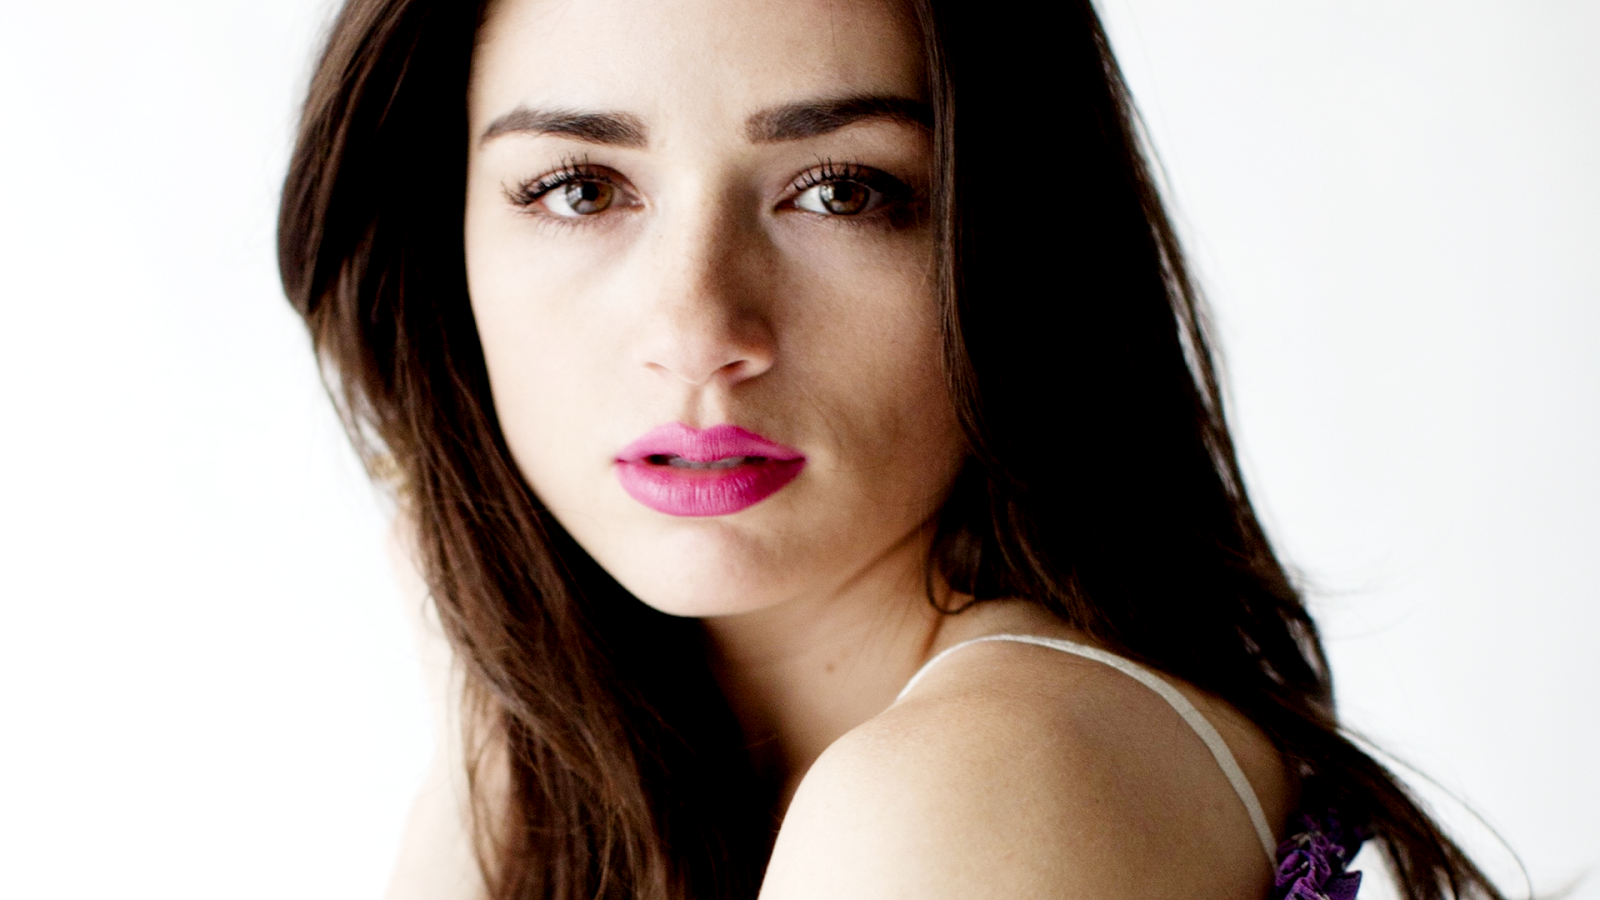 Crystal Reed Hd Wallpapers Free Download